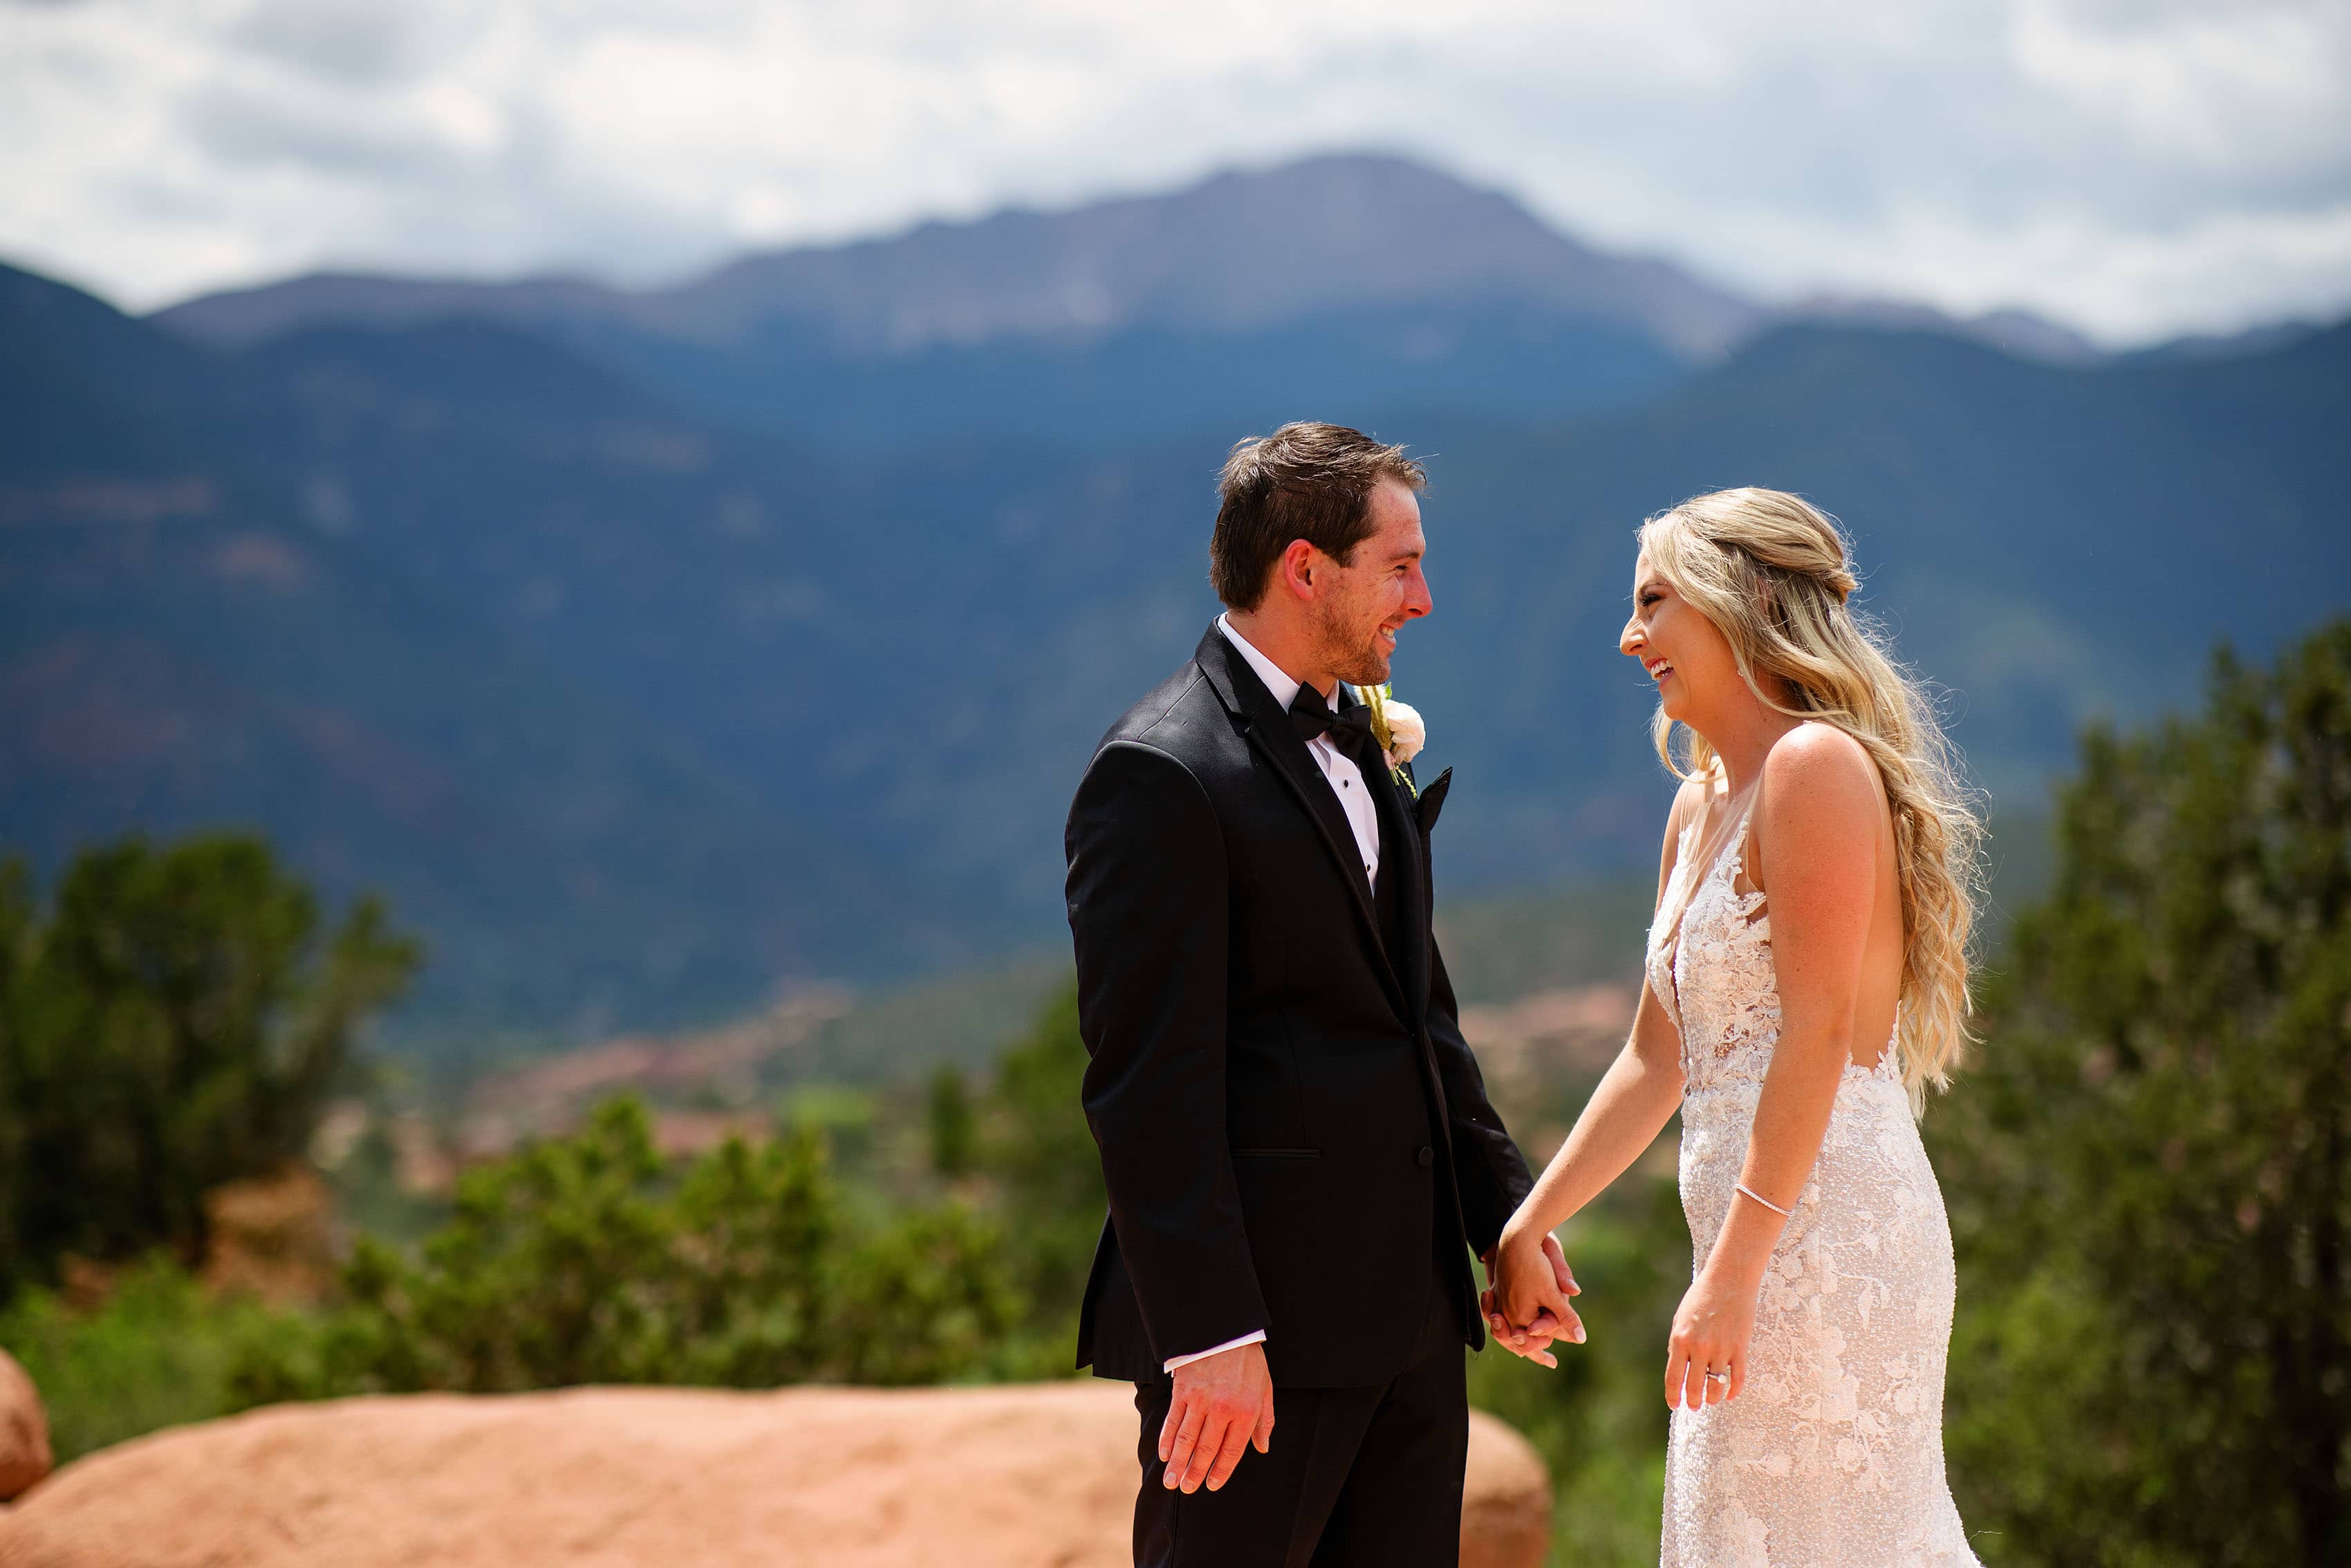 A couple laughs together in Colorado Springs on their wedding day